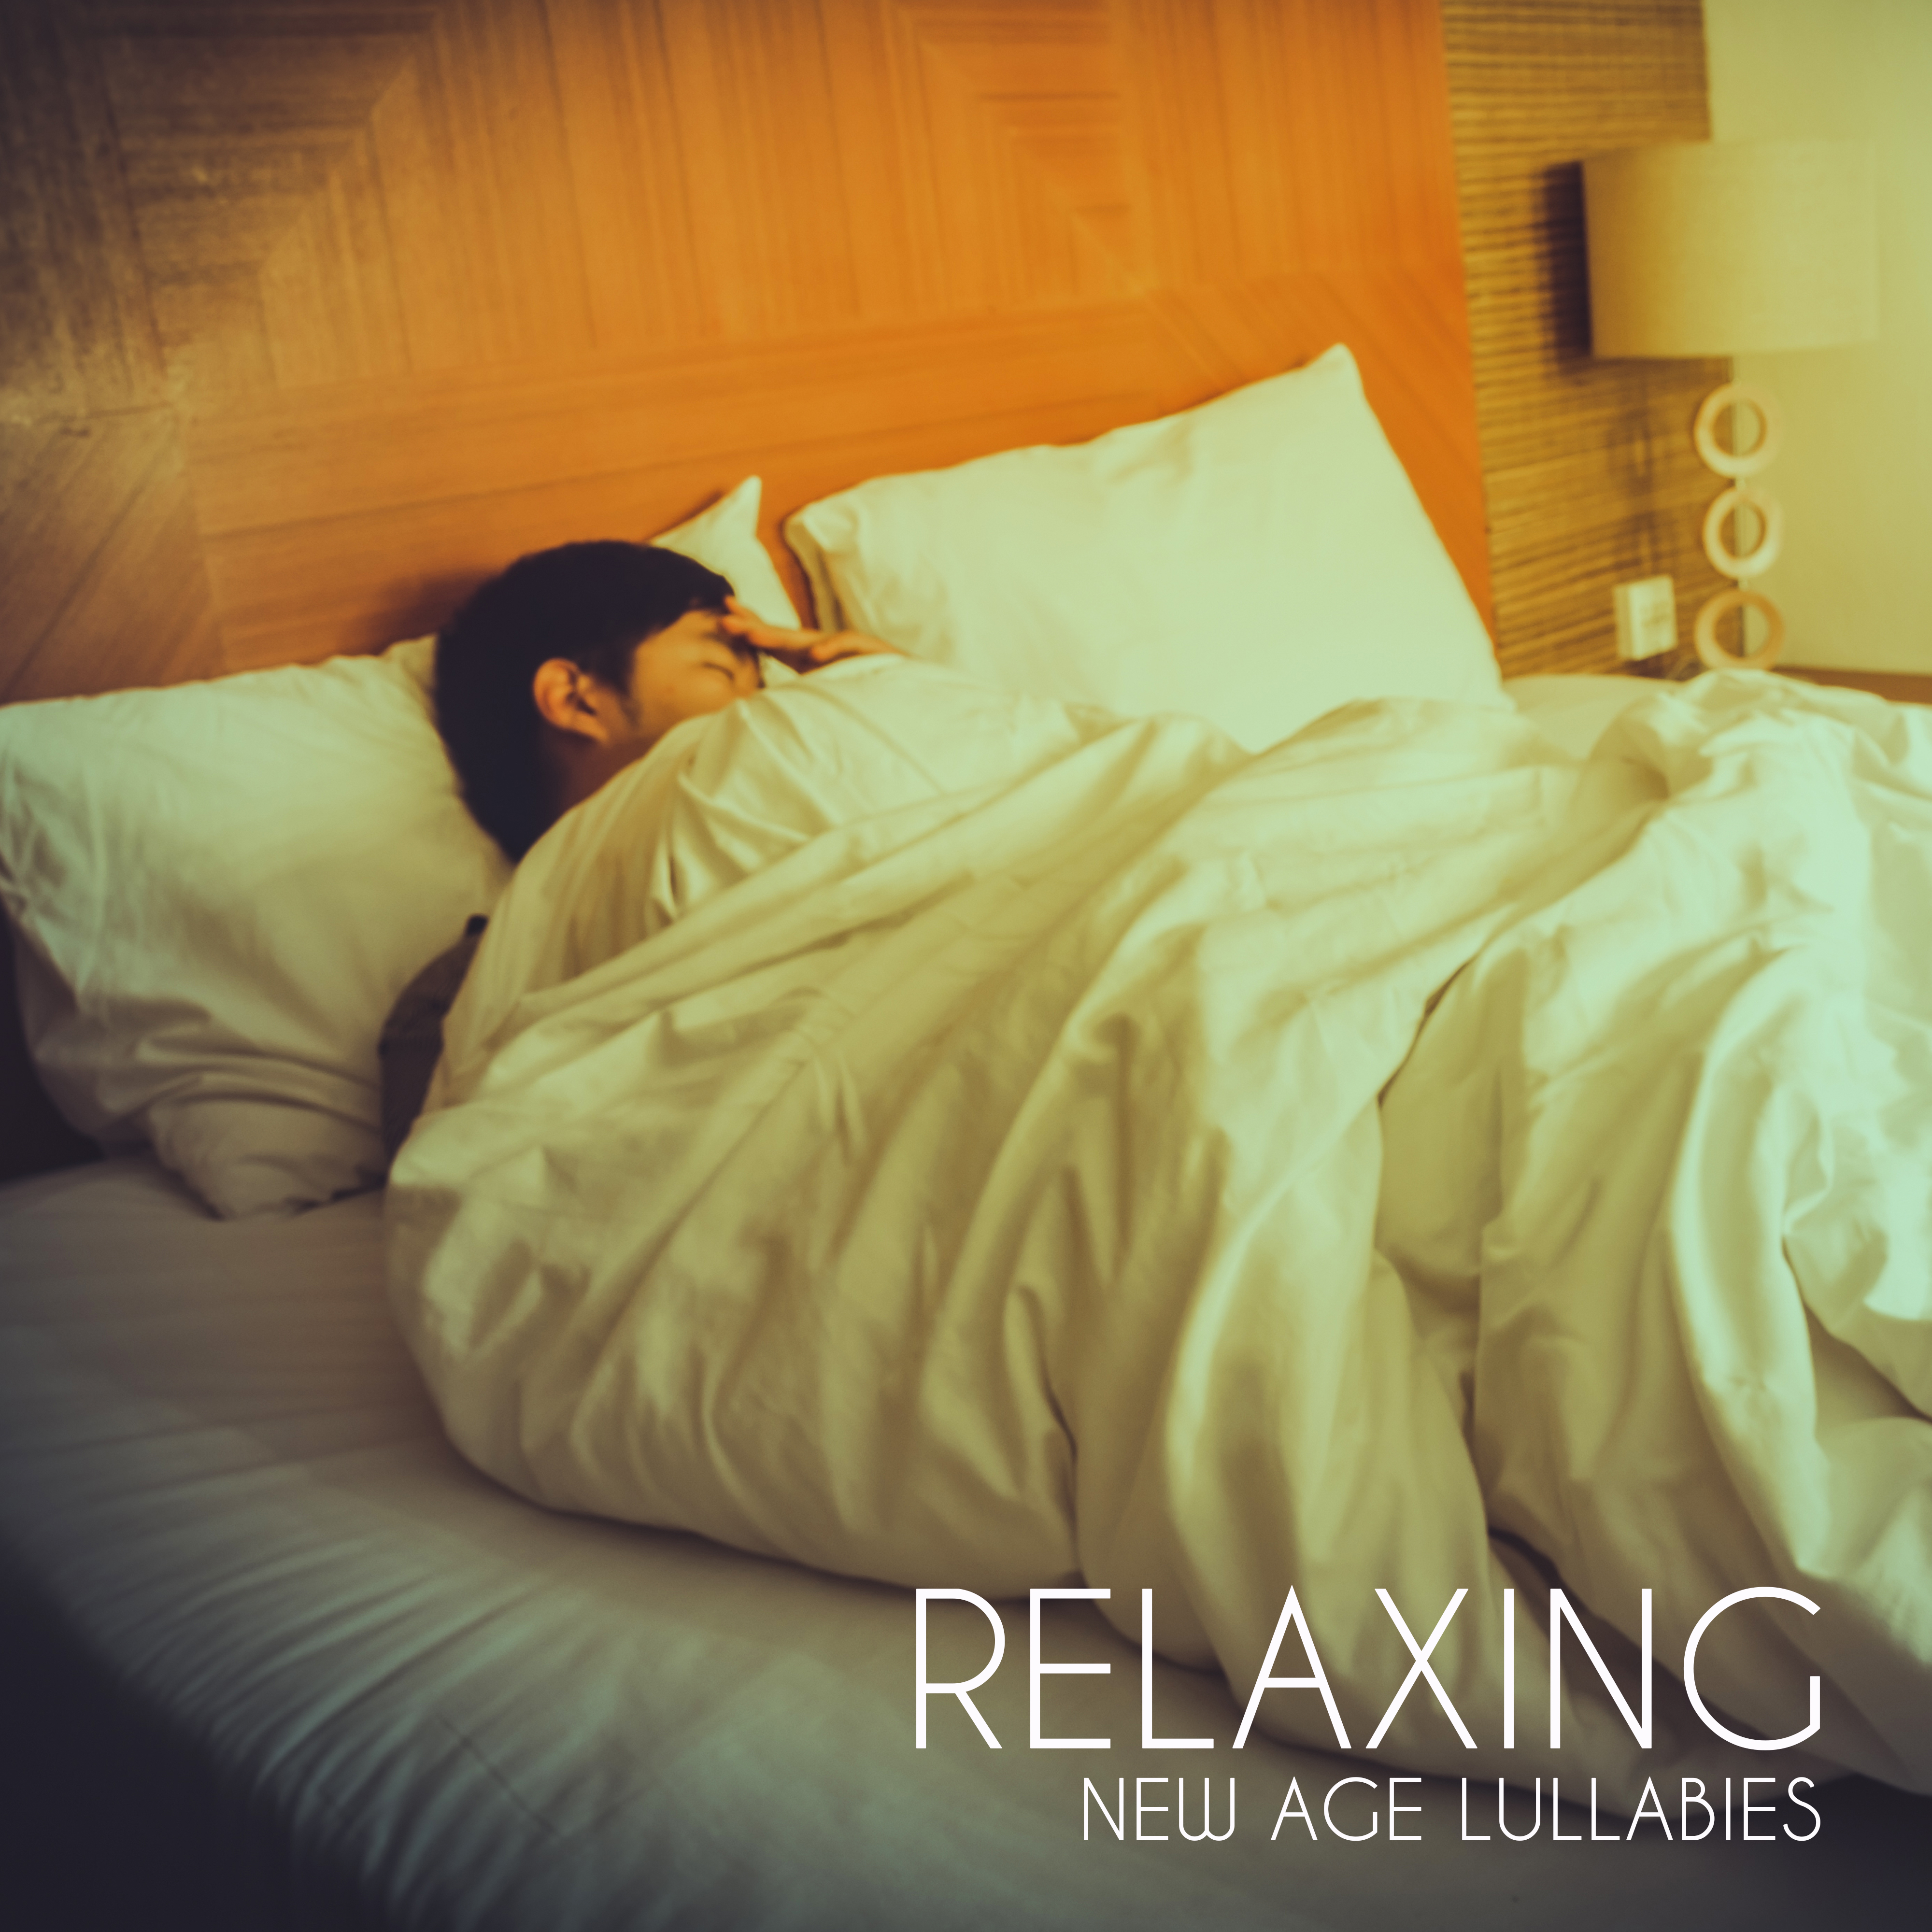 Relaxing New Age Lullabies